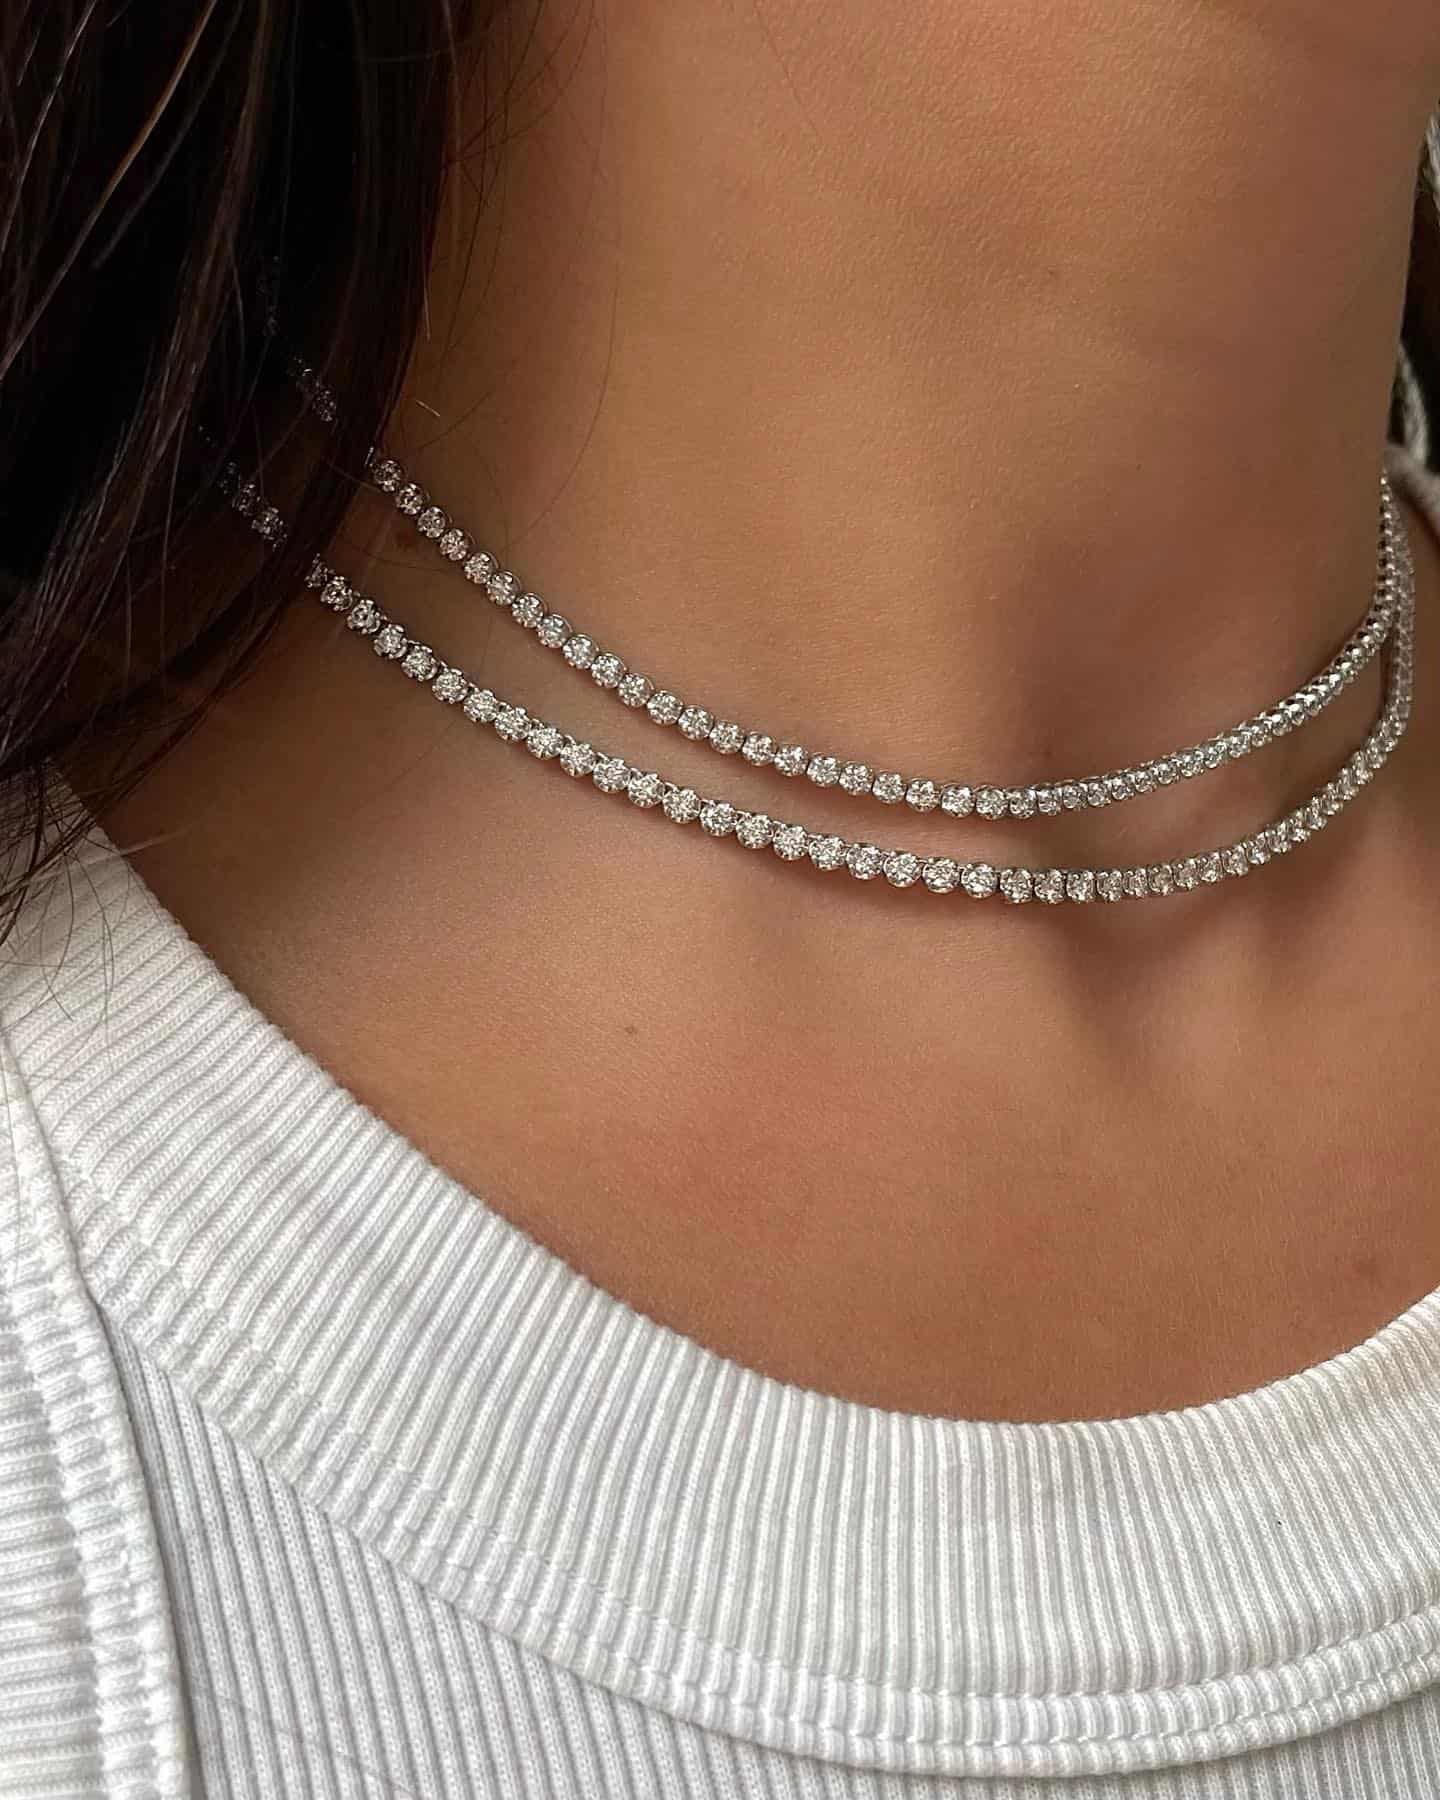 How to choose the perfect Diamond Tennis Necklace